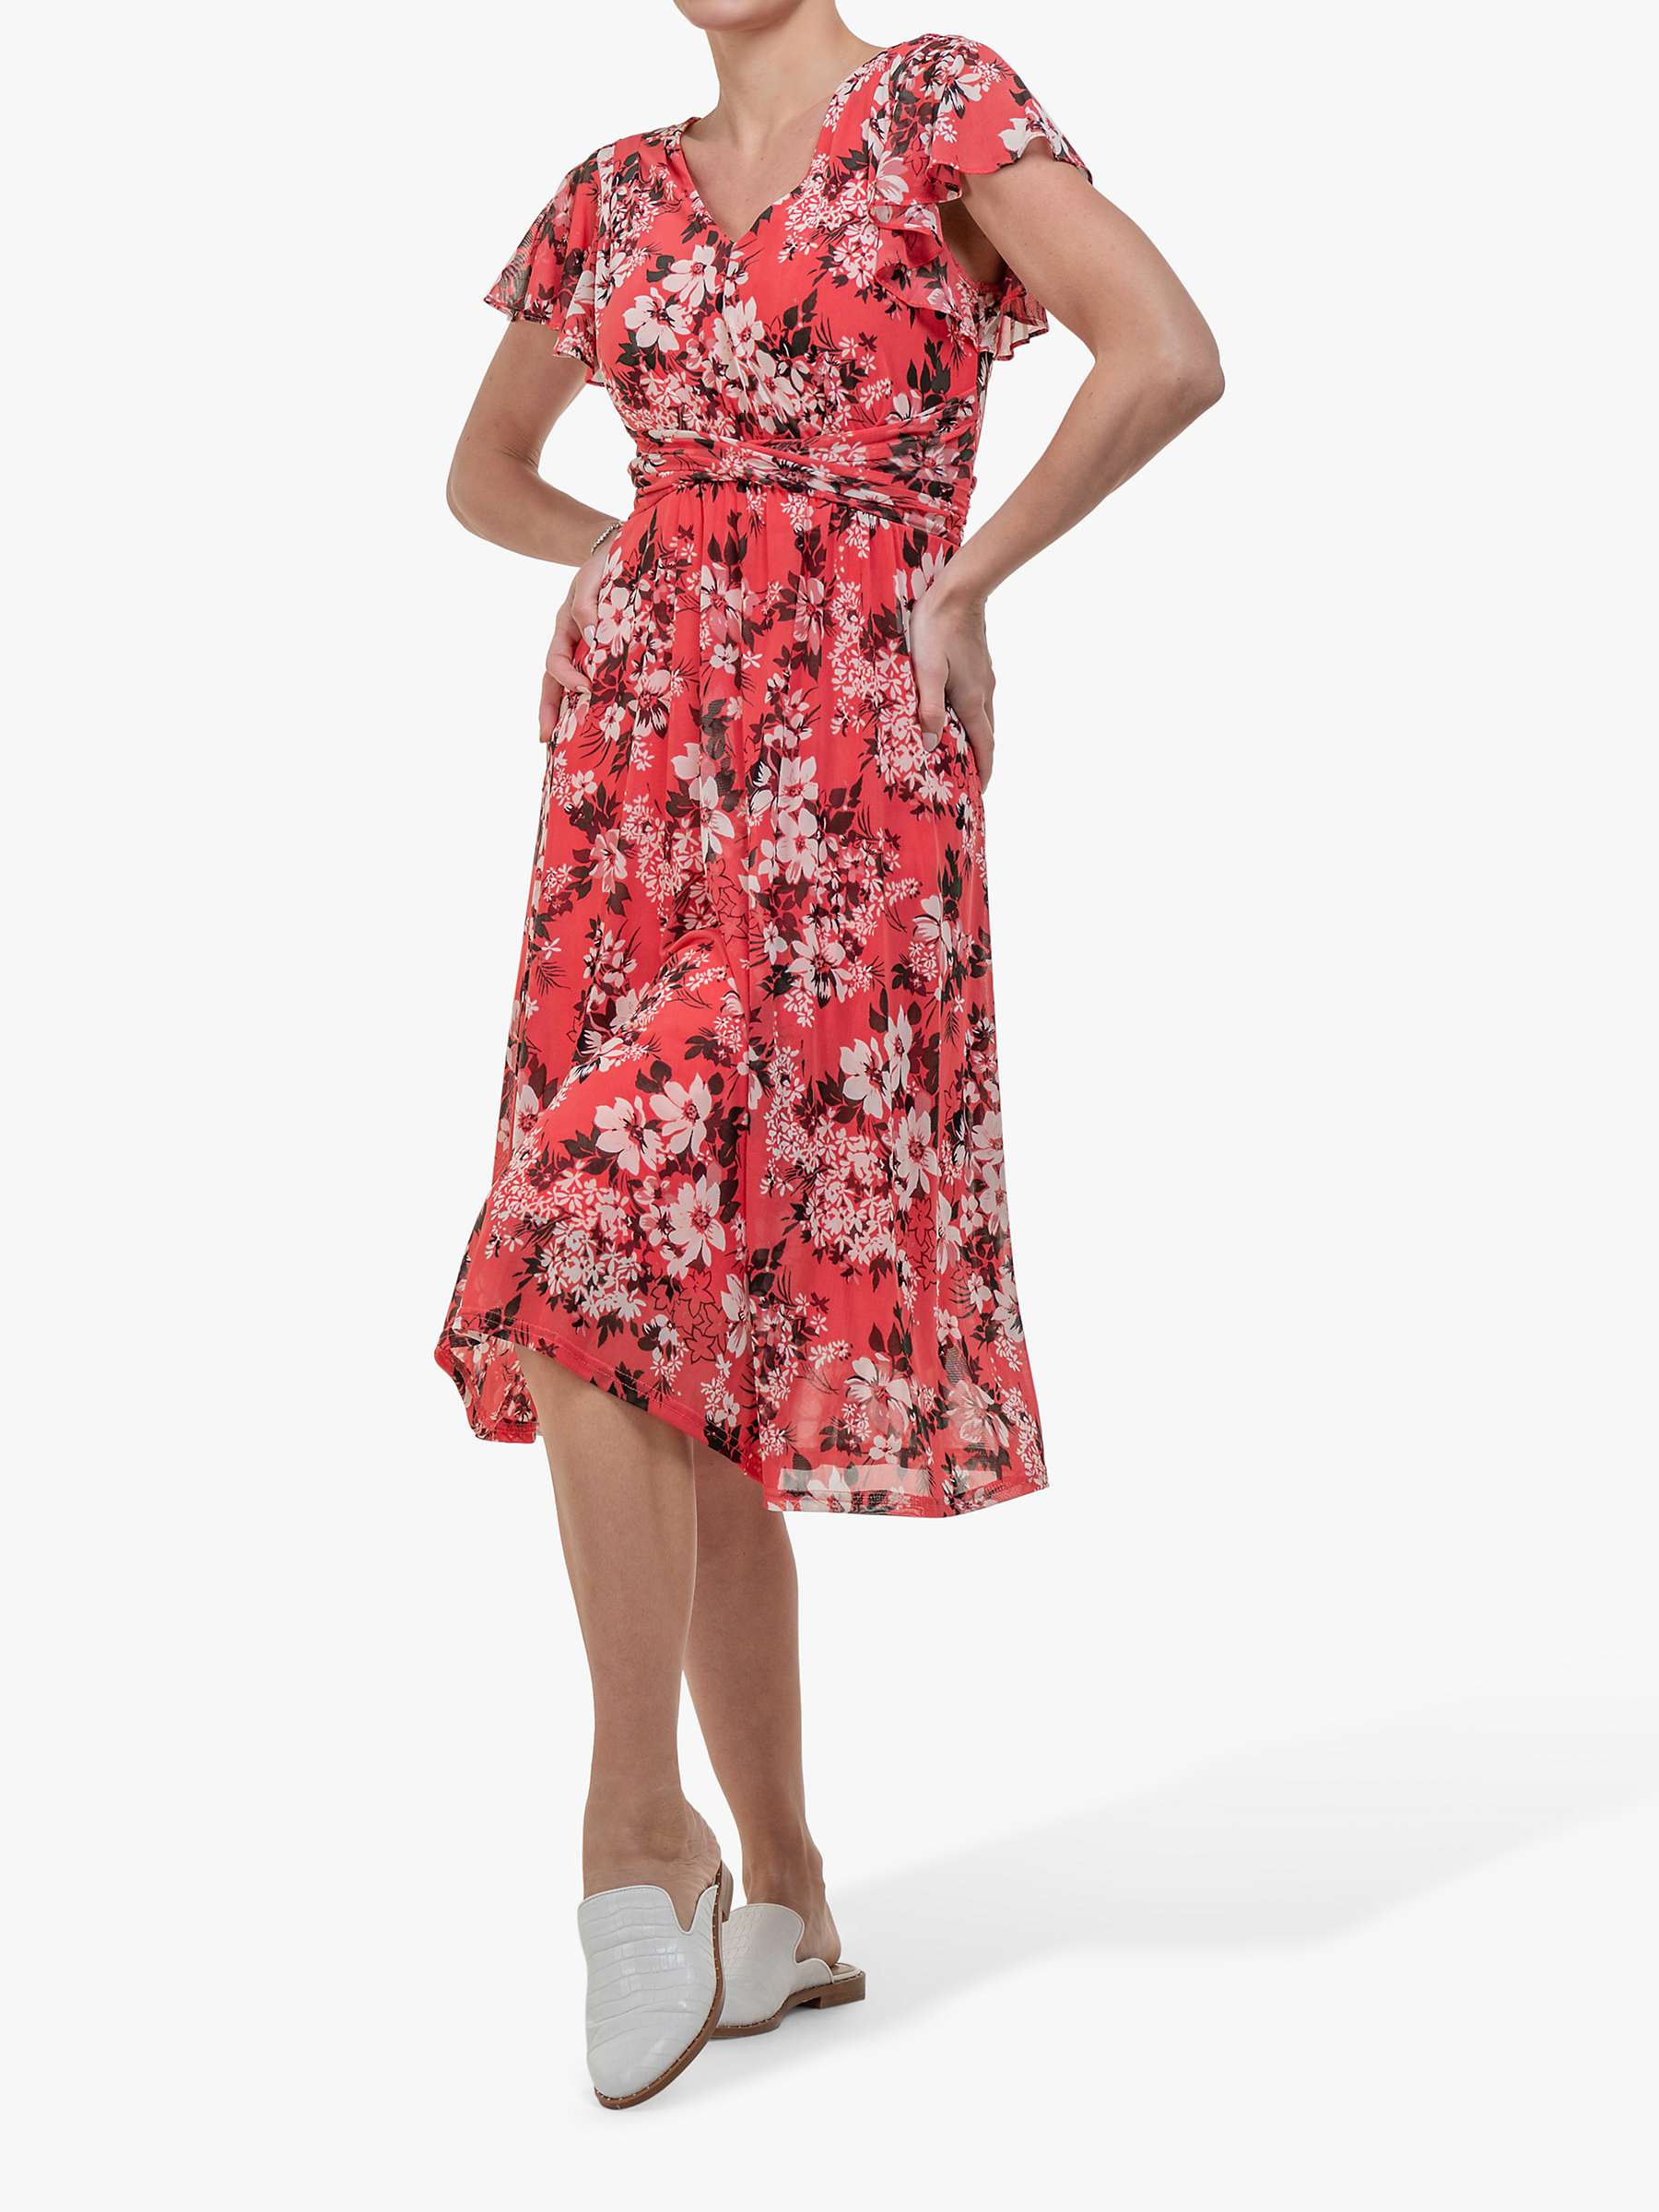 Jolie Moi Bethany Floral Flared Dress, Coral at John Lewis & Partners